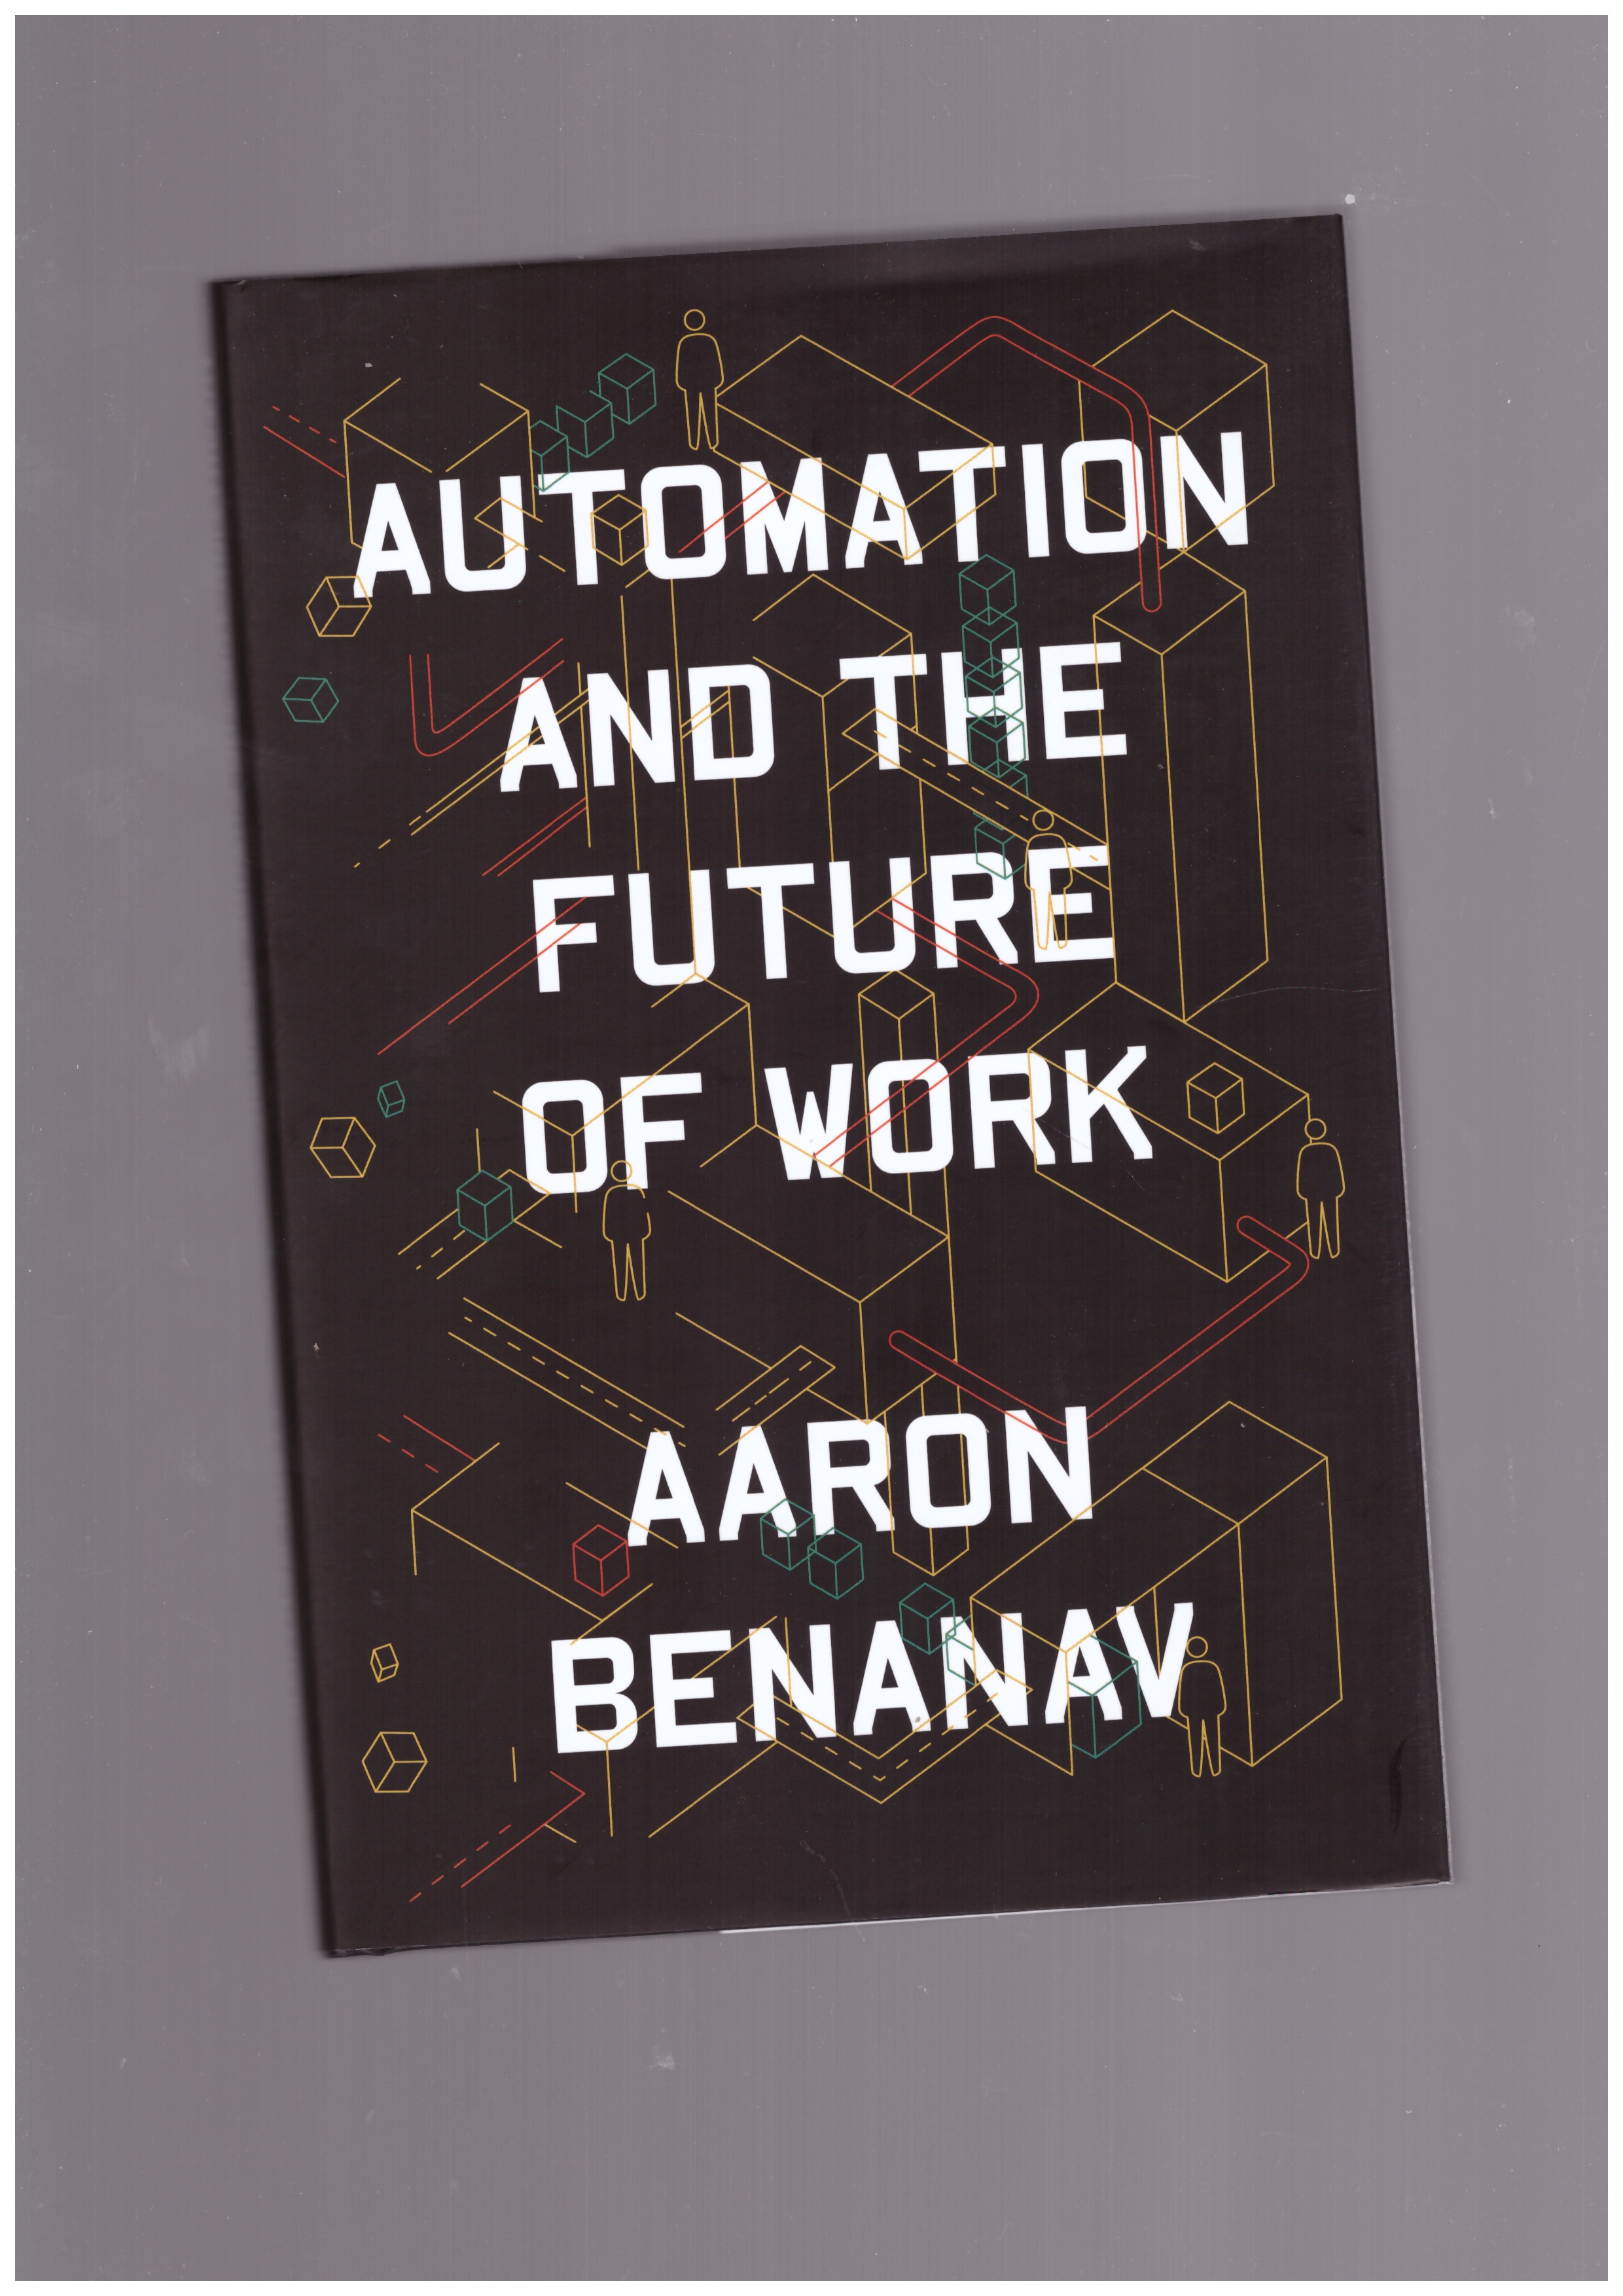 BENANAV, Aaron - Automation and the Future of Work